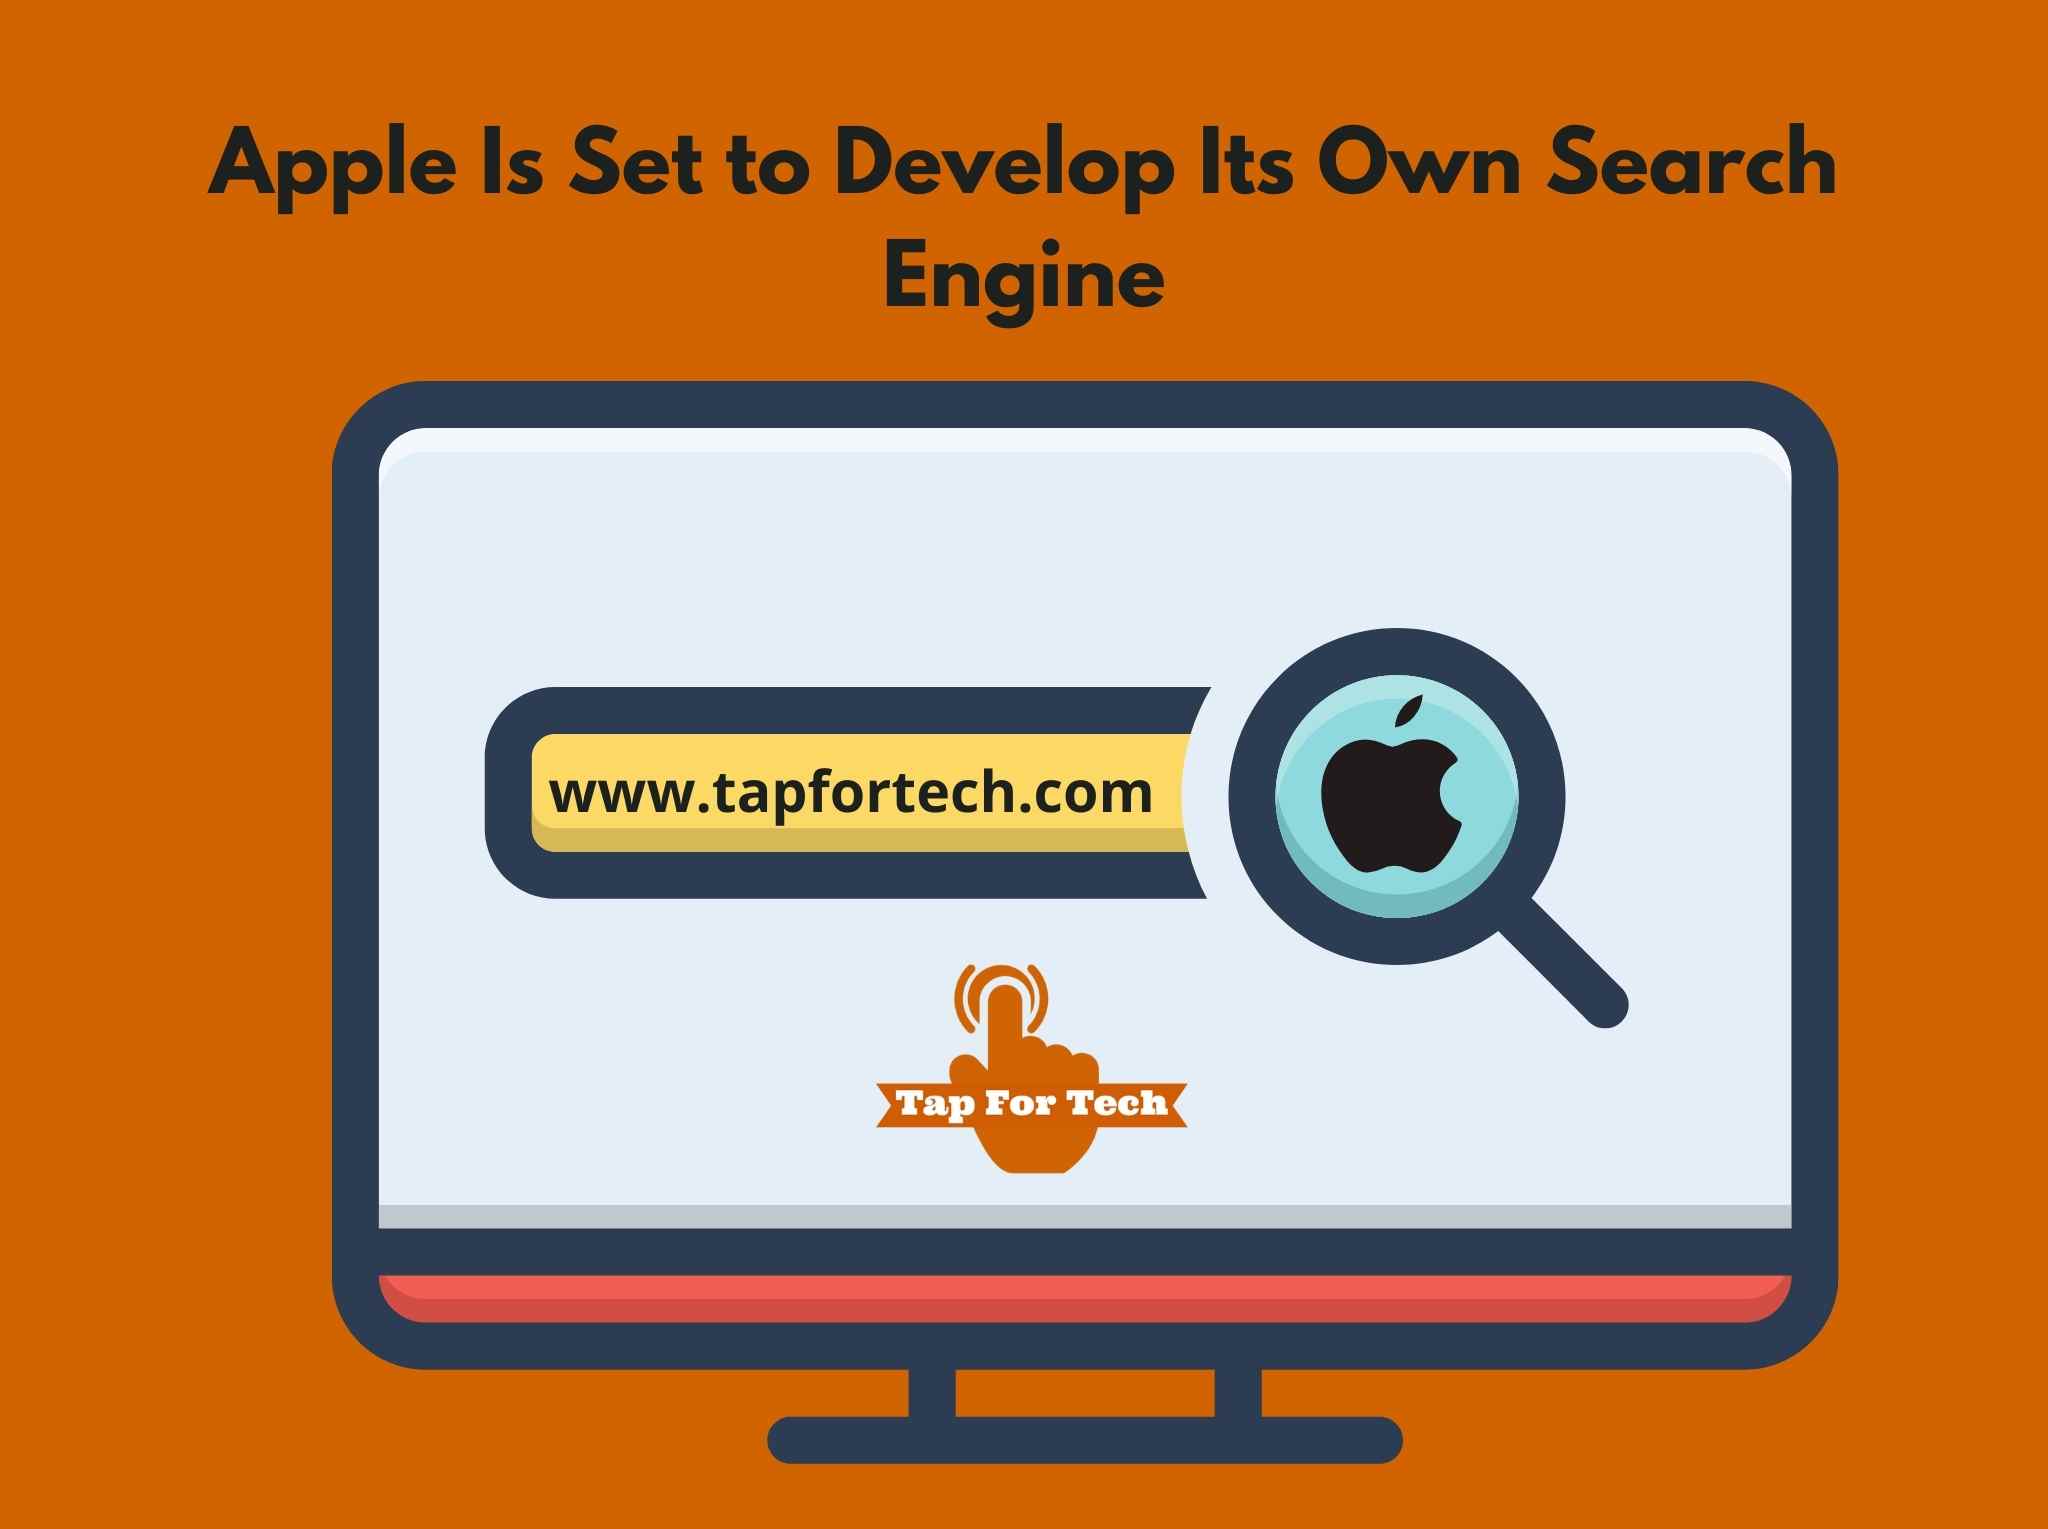 Apple Is Set to Develop Its Own Search Engine